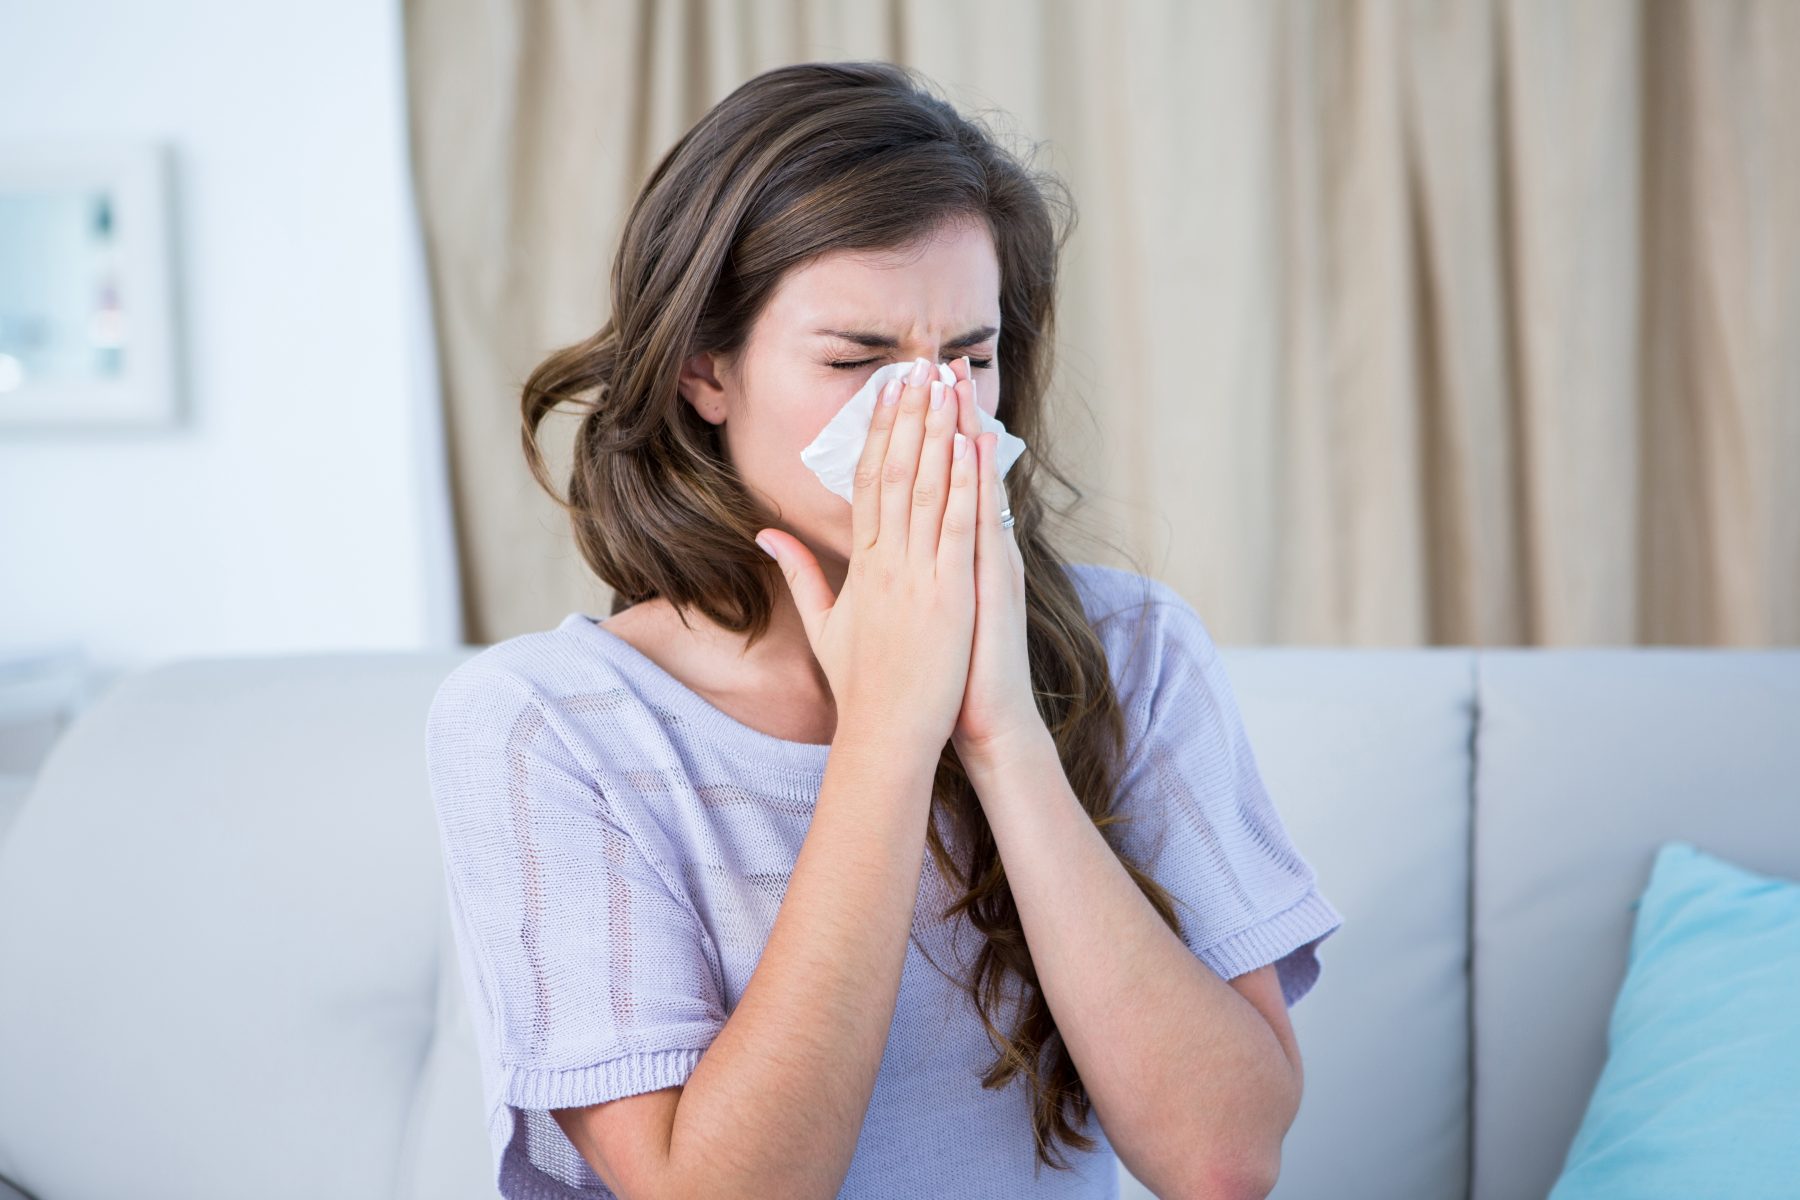 Sick woman blowing her nose because of allergies